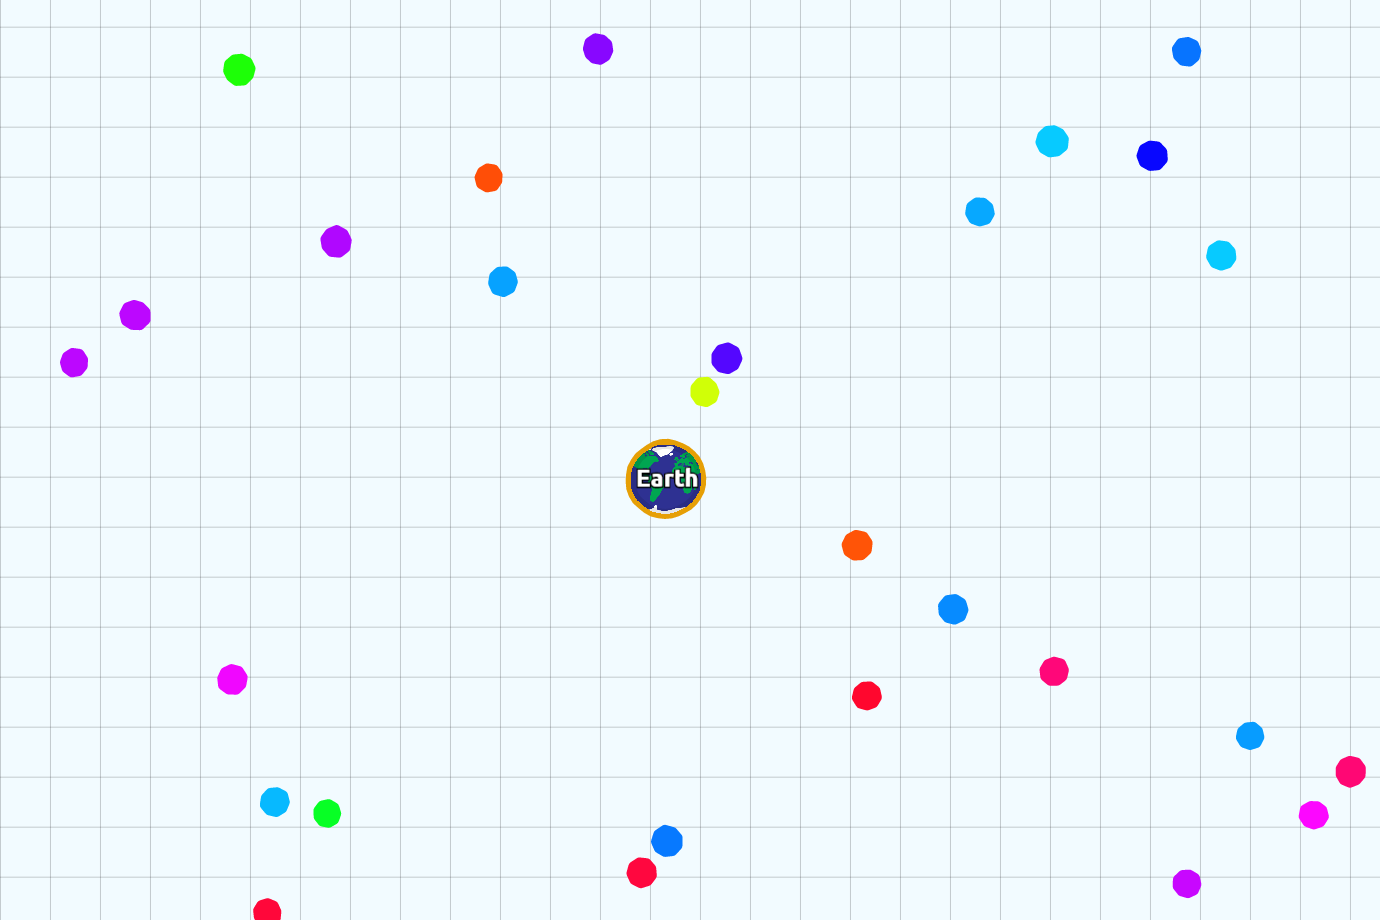 What the Heck is 'Agar.io', and Why Should You Care? – TouchArcade